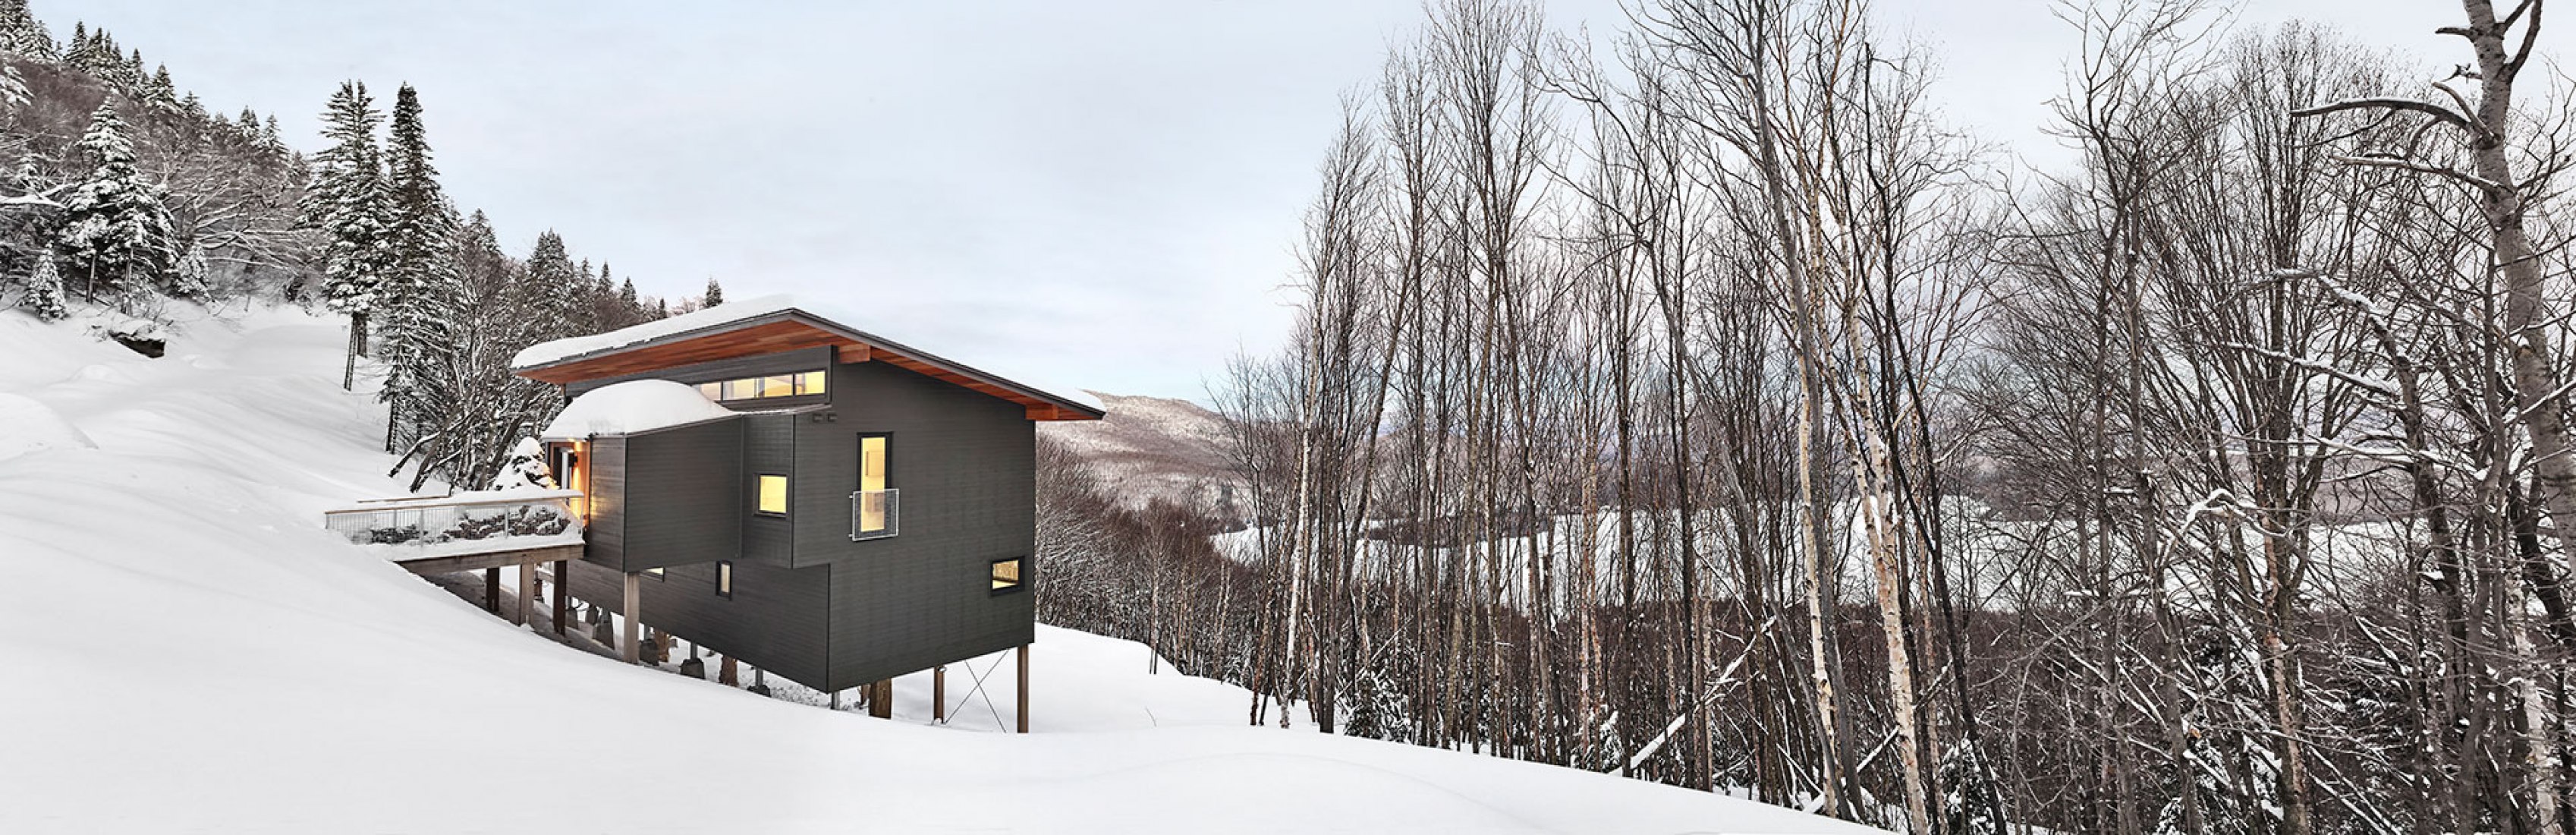 Outside view. Laurentian Ski Chalet by RobitailleCurtis. Photograph by Marc Cramer.